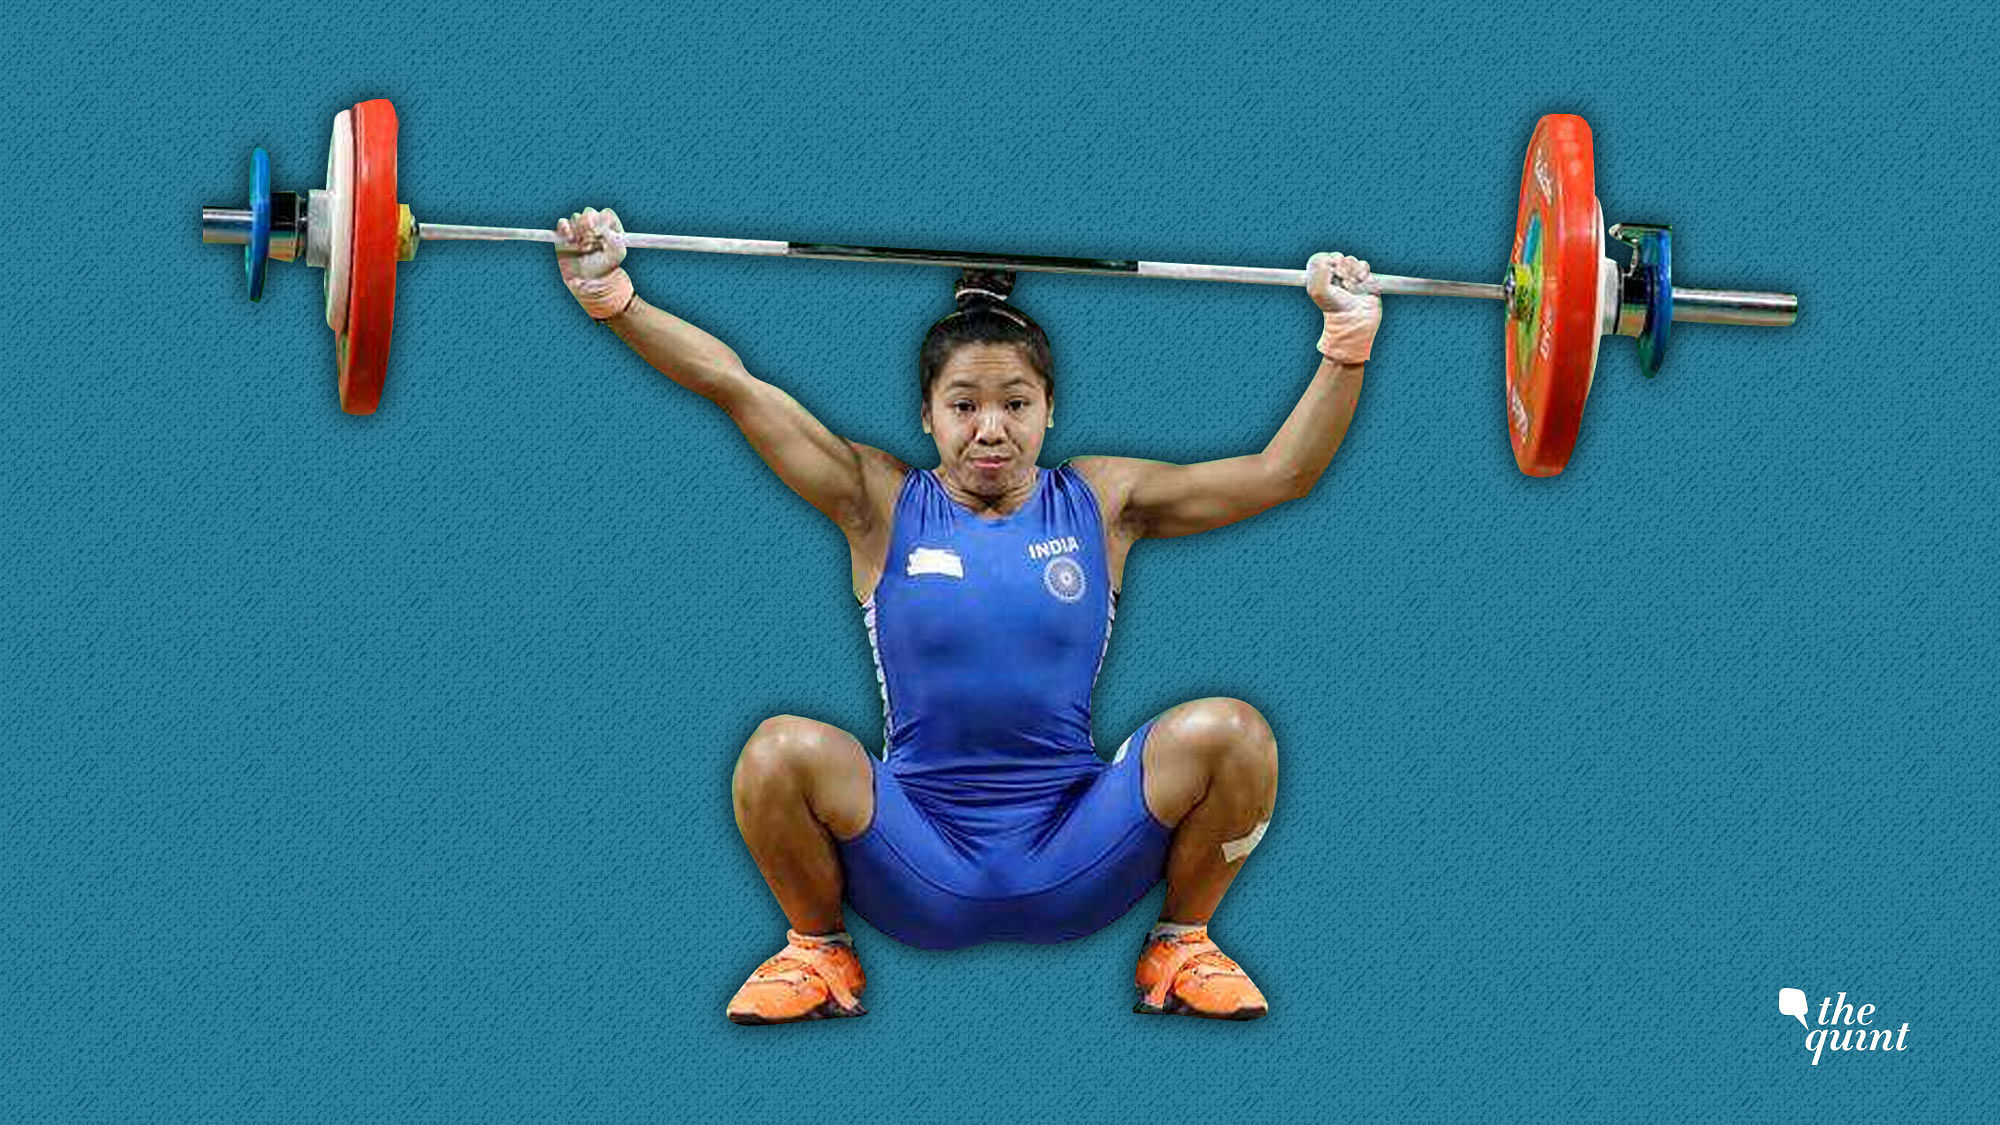 Mirabai Chanu&nbsp; won  Gold  in the 48kg category of the weightlifting event at the Gold Coast CWG.